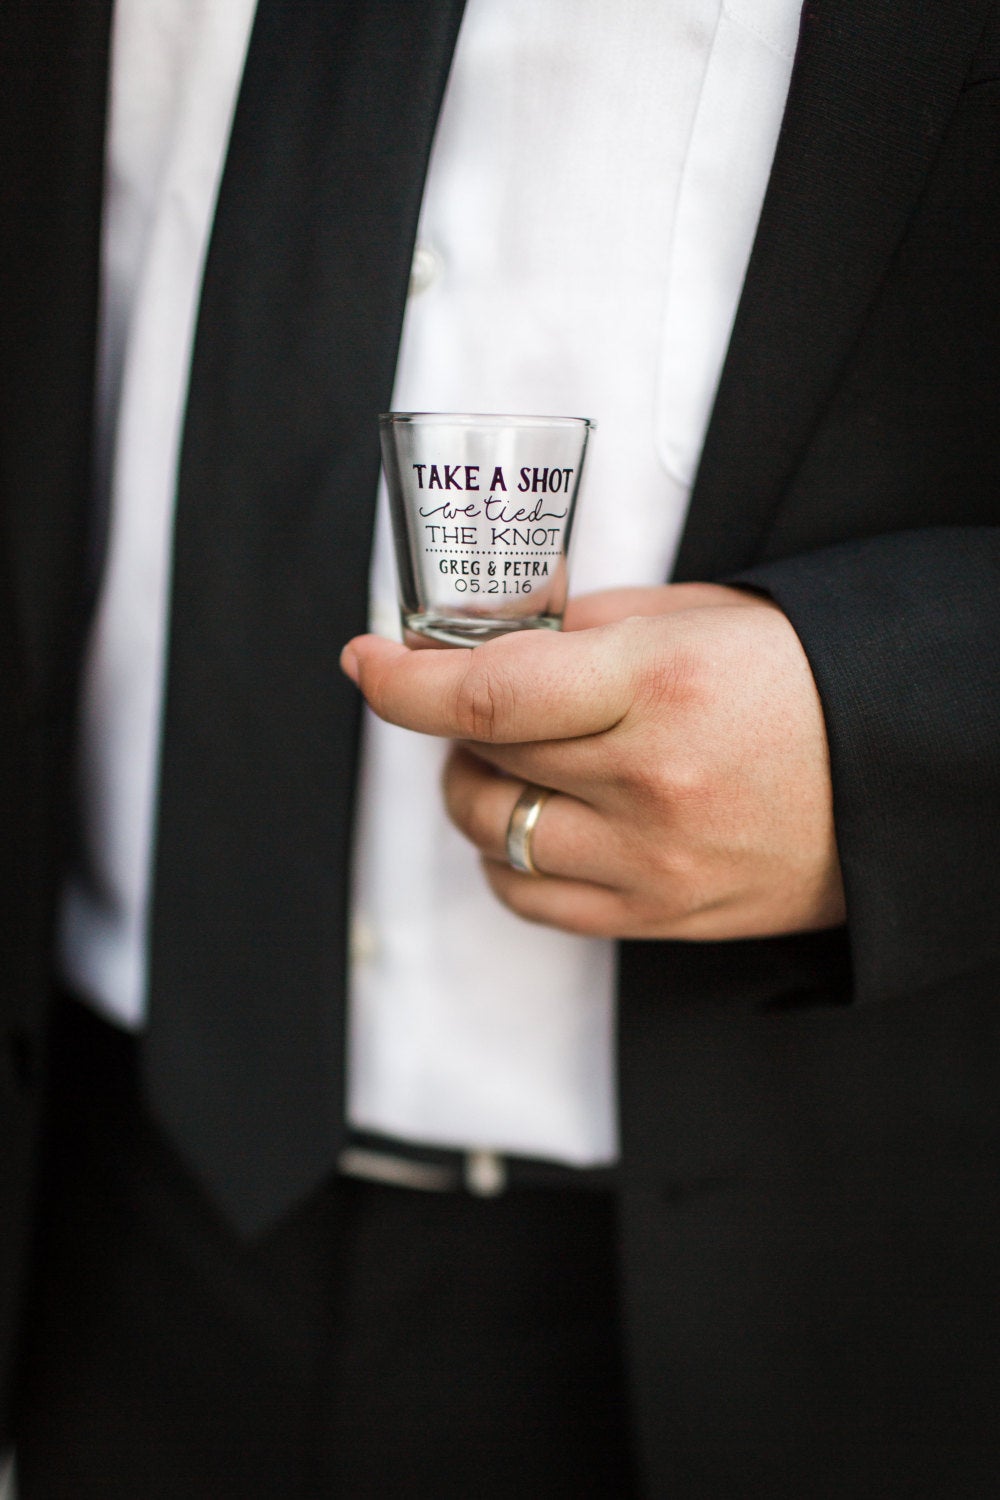 Take a Shot We Tied the Knot Wedding Shot Glass Design #1446